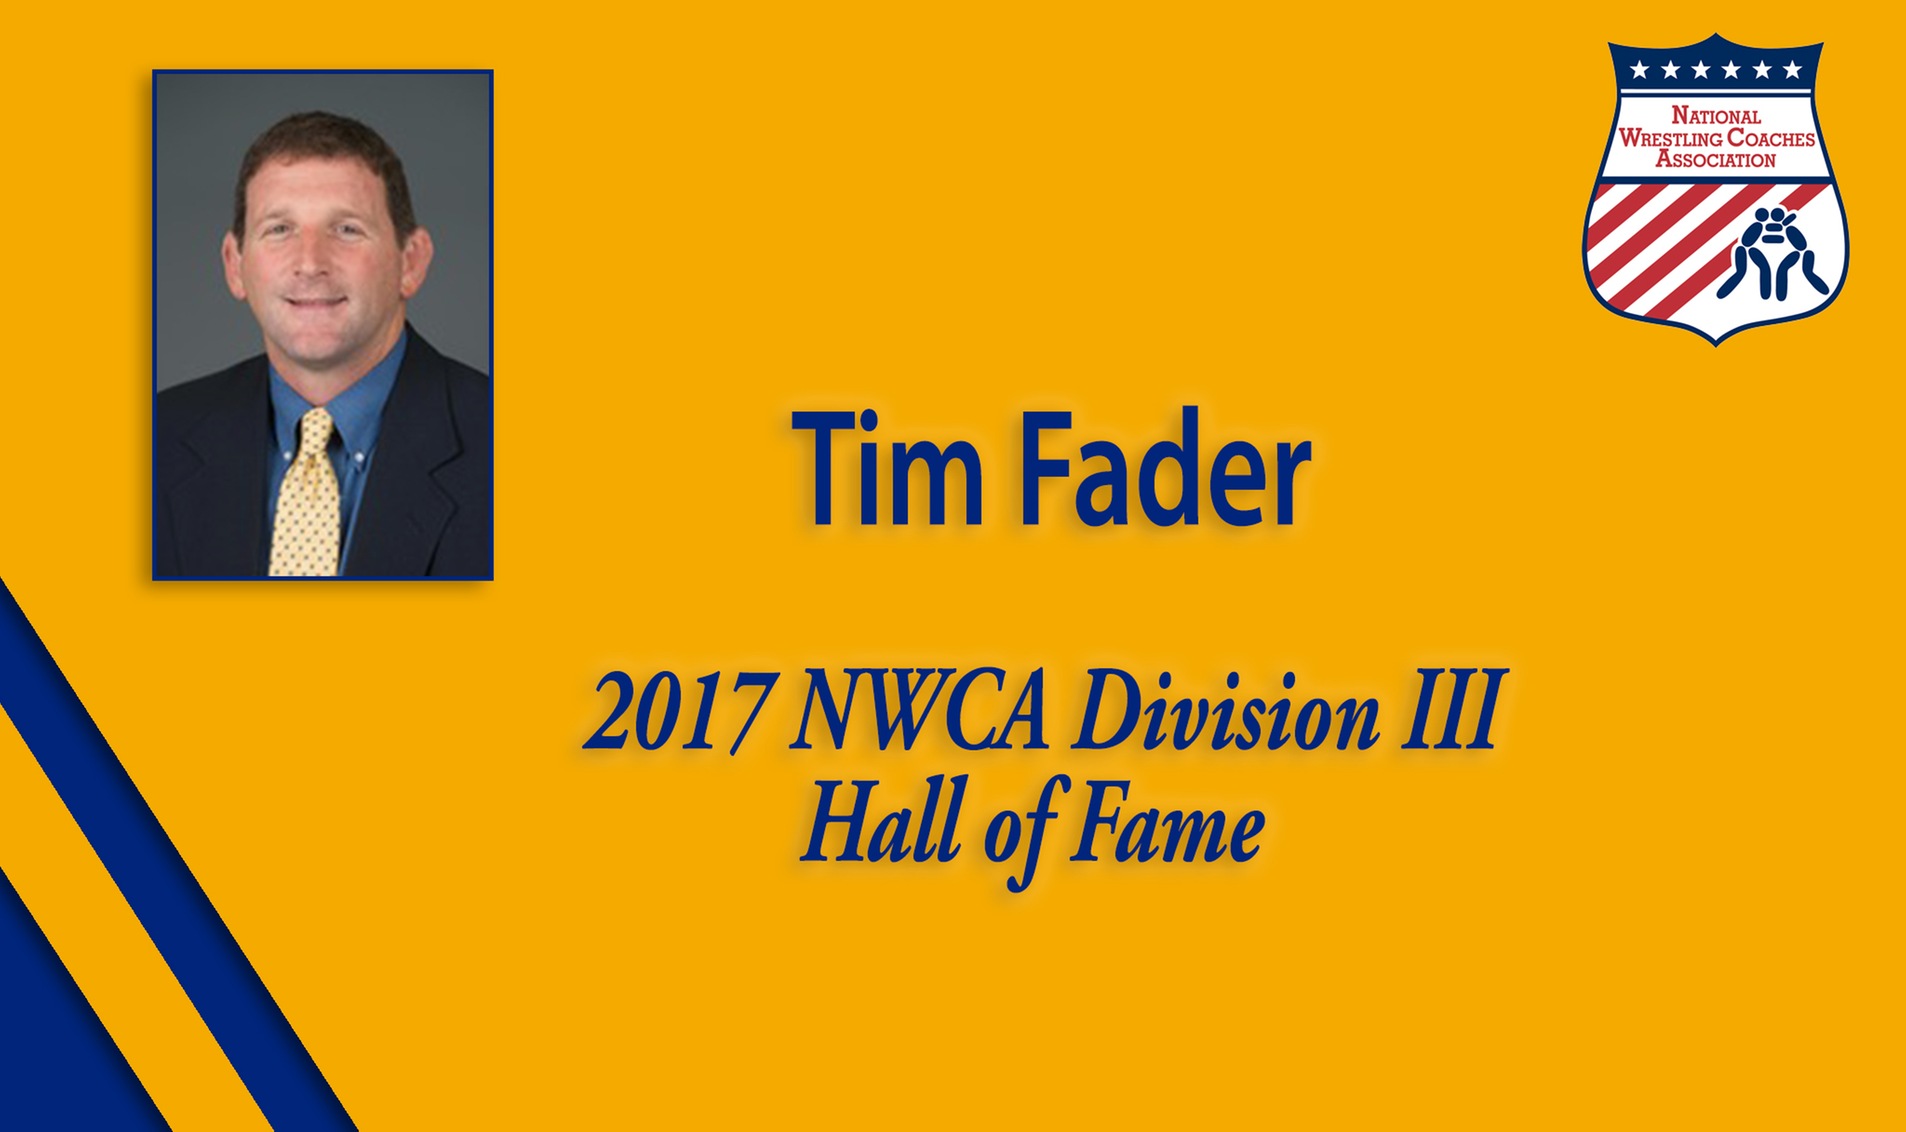 Fader to be Inducted into NWCA Division III Hall of Fame